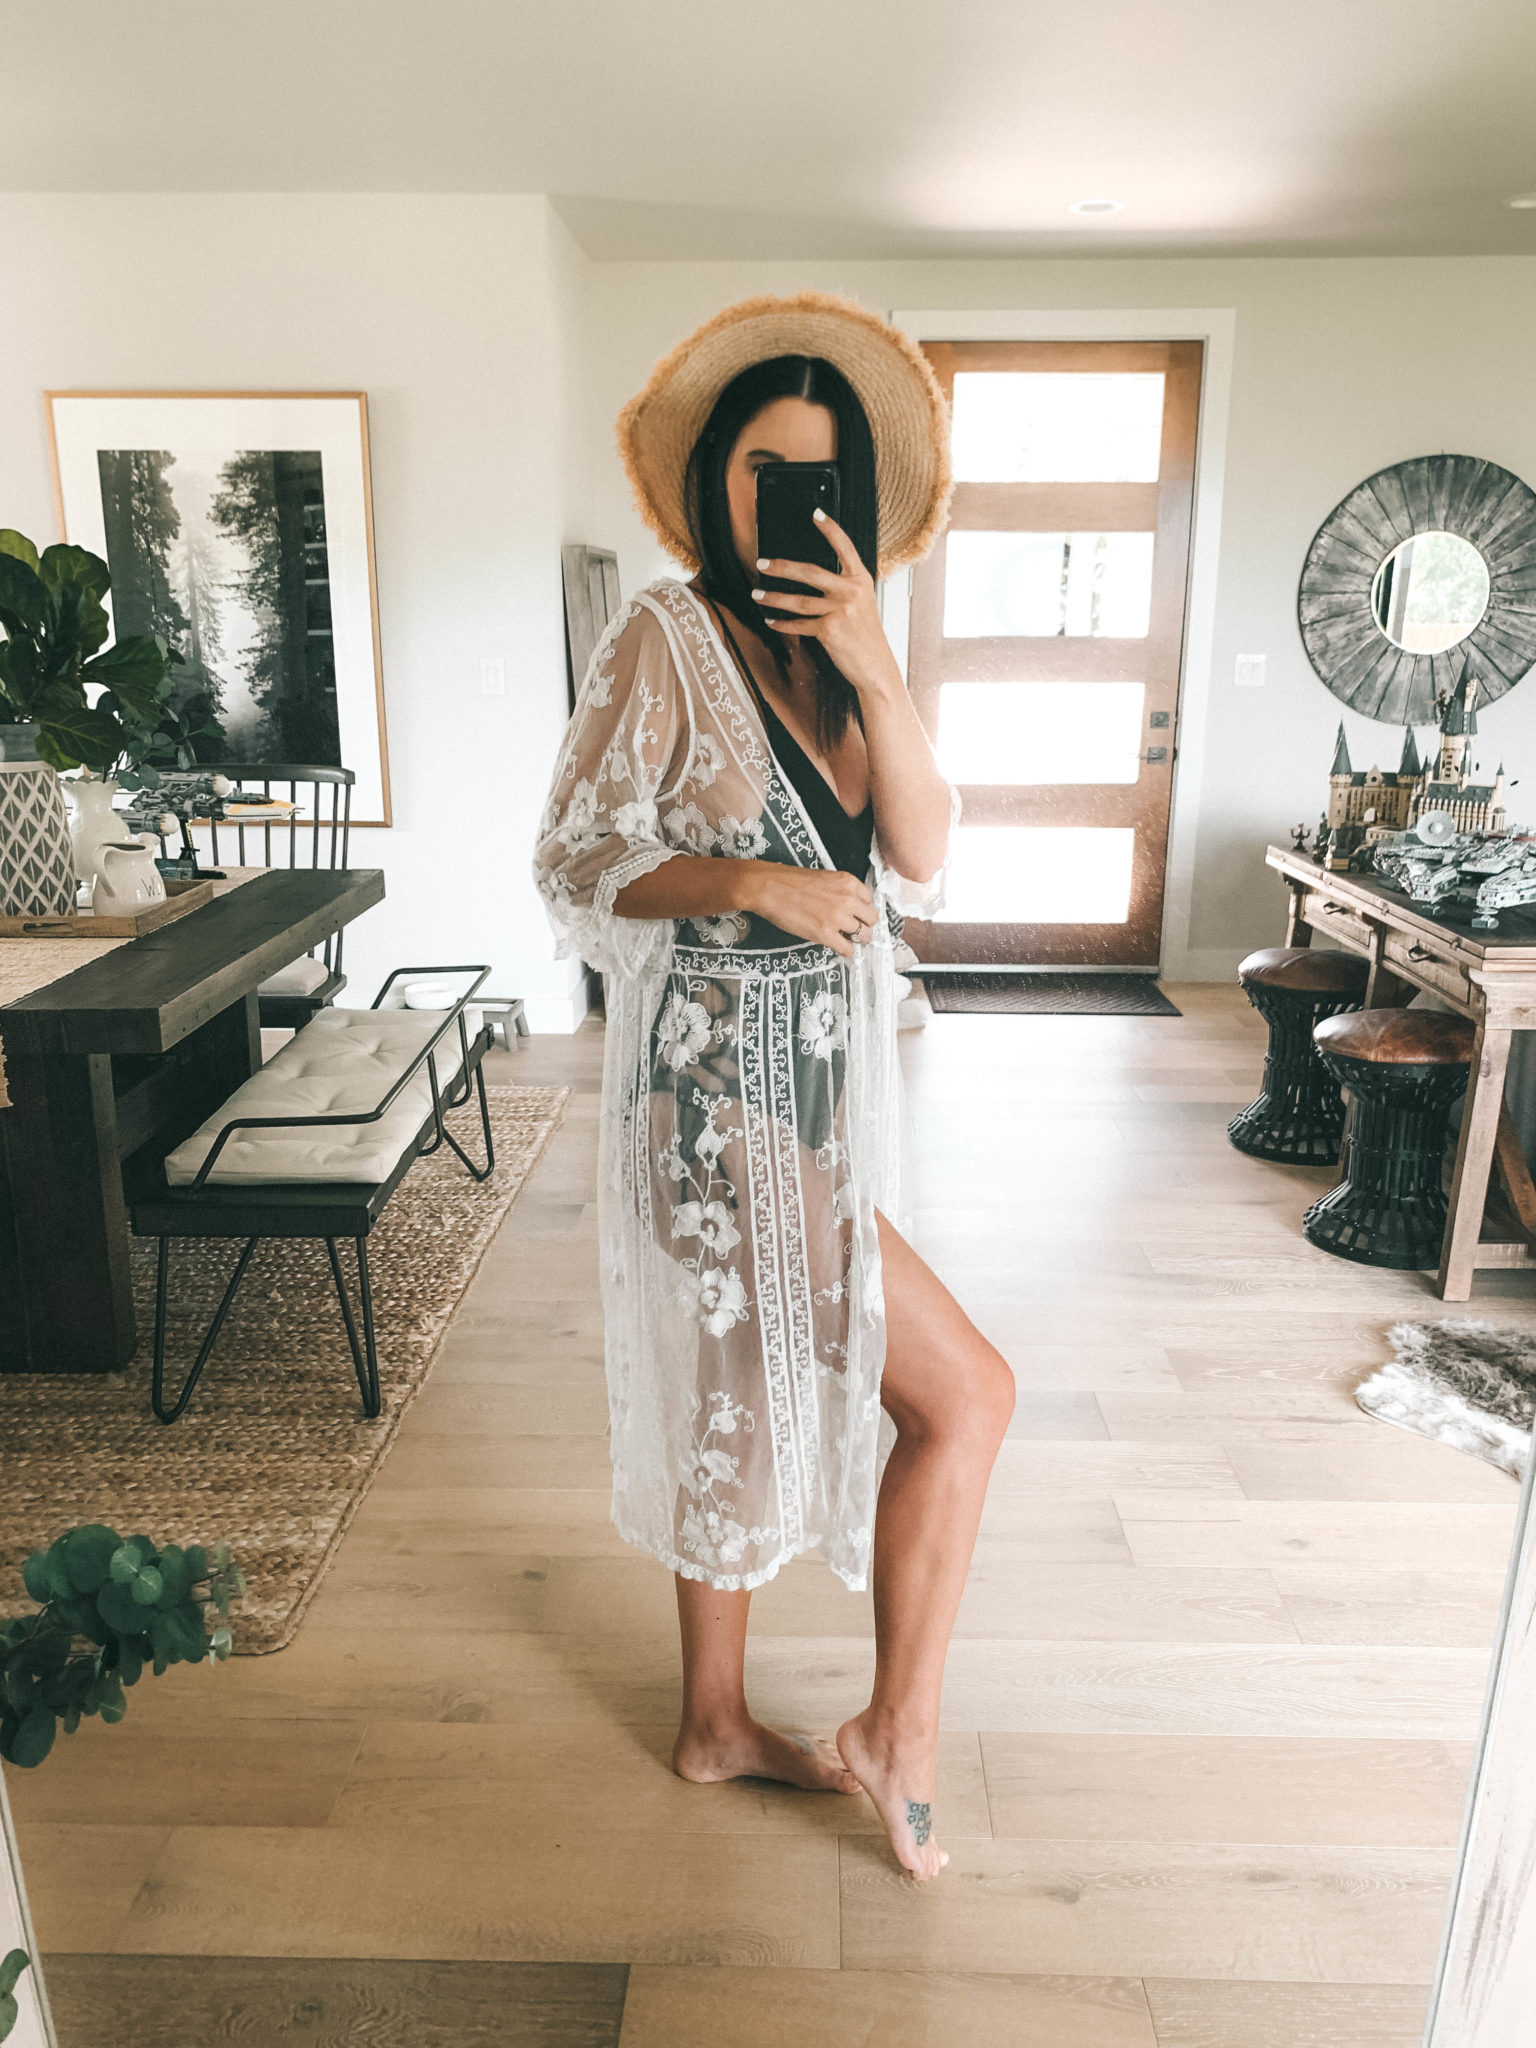 Amaryllis Apparel Abroad Turks & Caicos Summer Try-On by popular Austin fashion blog, Dressed to Kill: image of a woman wearing an Amaryllis Apparel black lace up one piece and white Amaryllis Apparel Camellia Kimono.